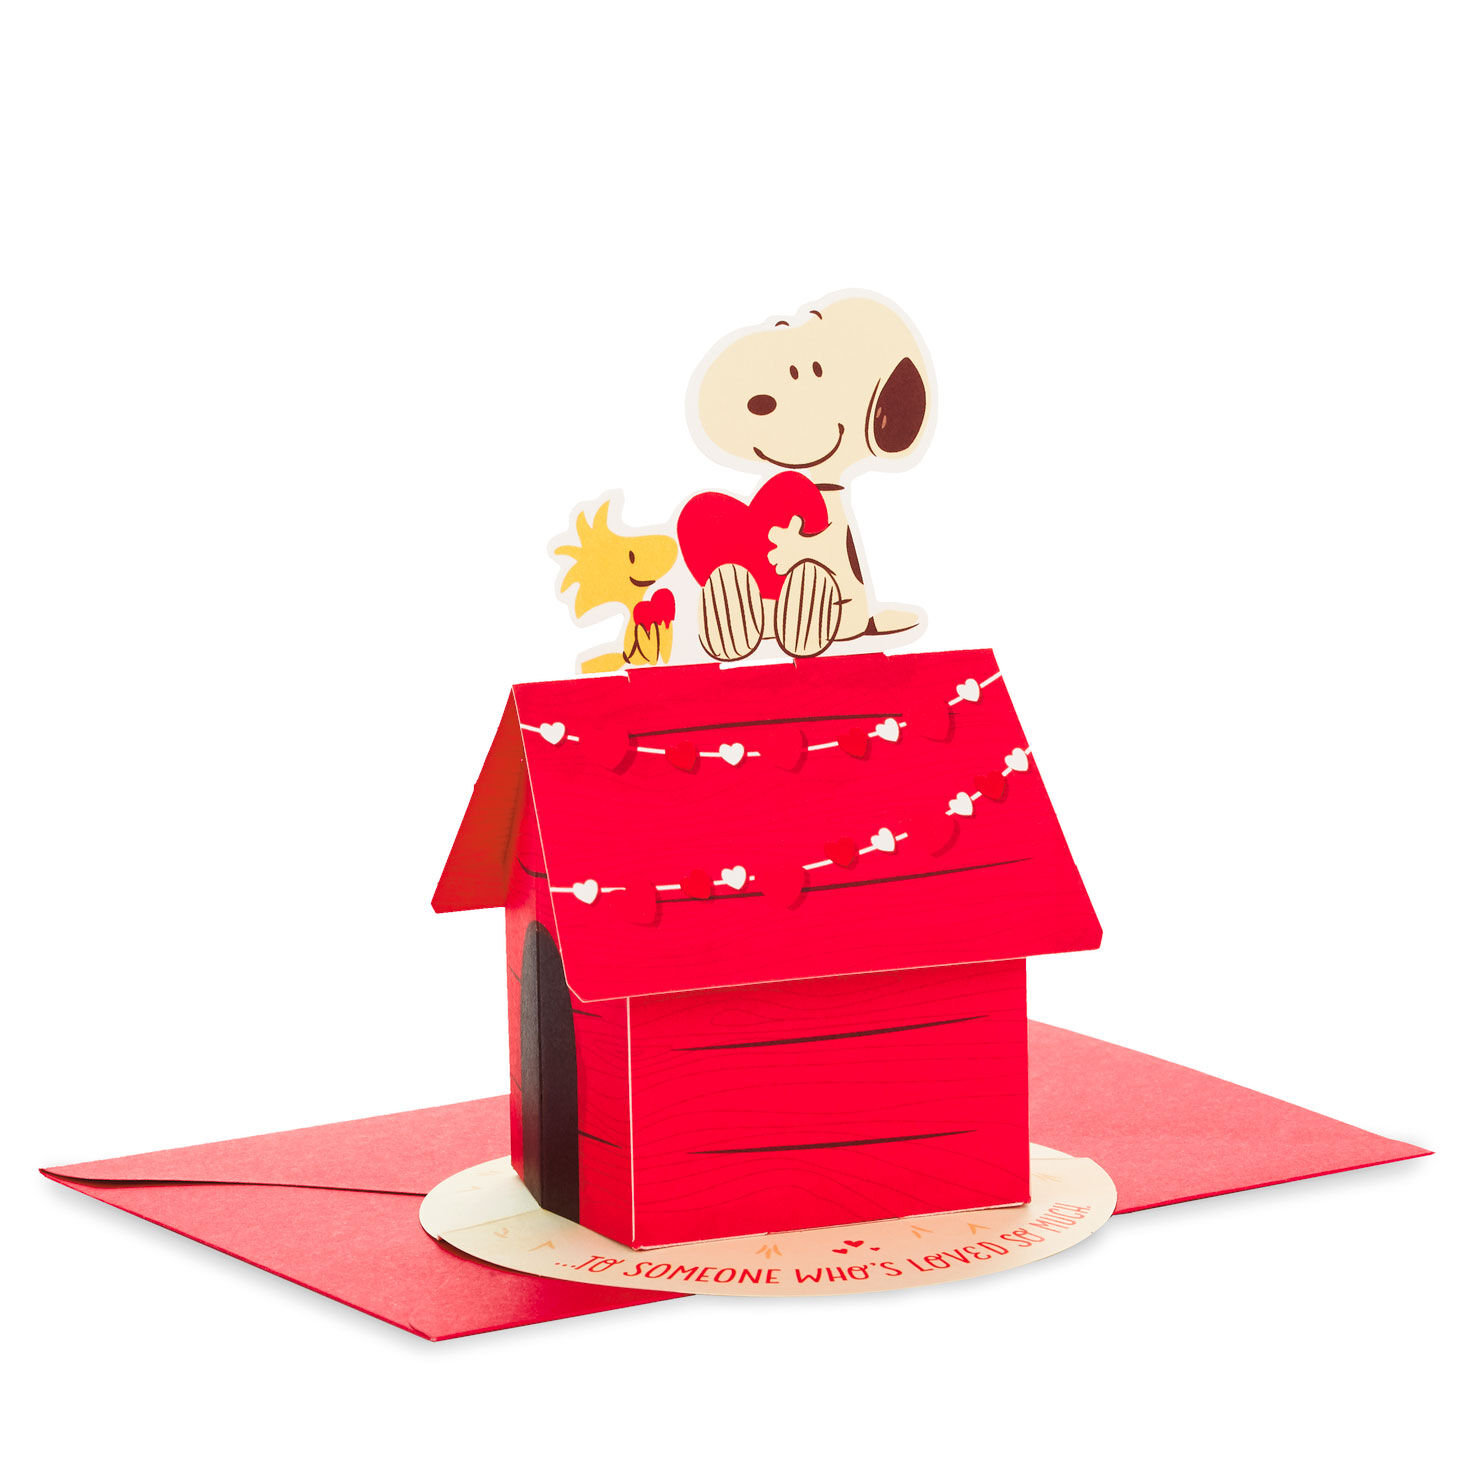 Peanuts® Snoopy and Woodstock Loved 3D Pop-Up Valentine's Day Card